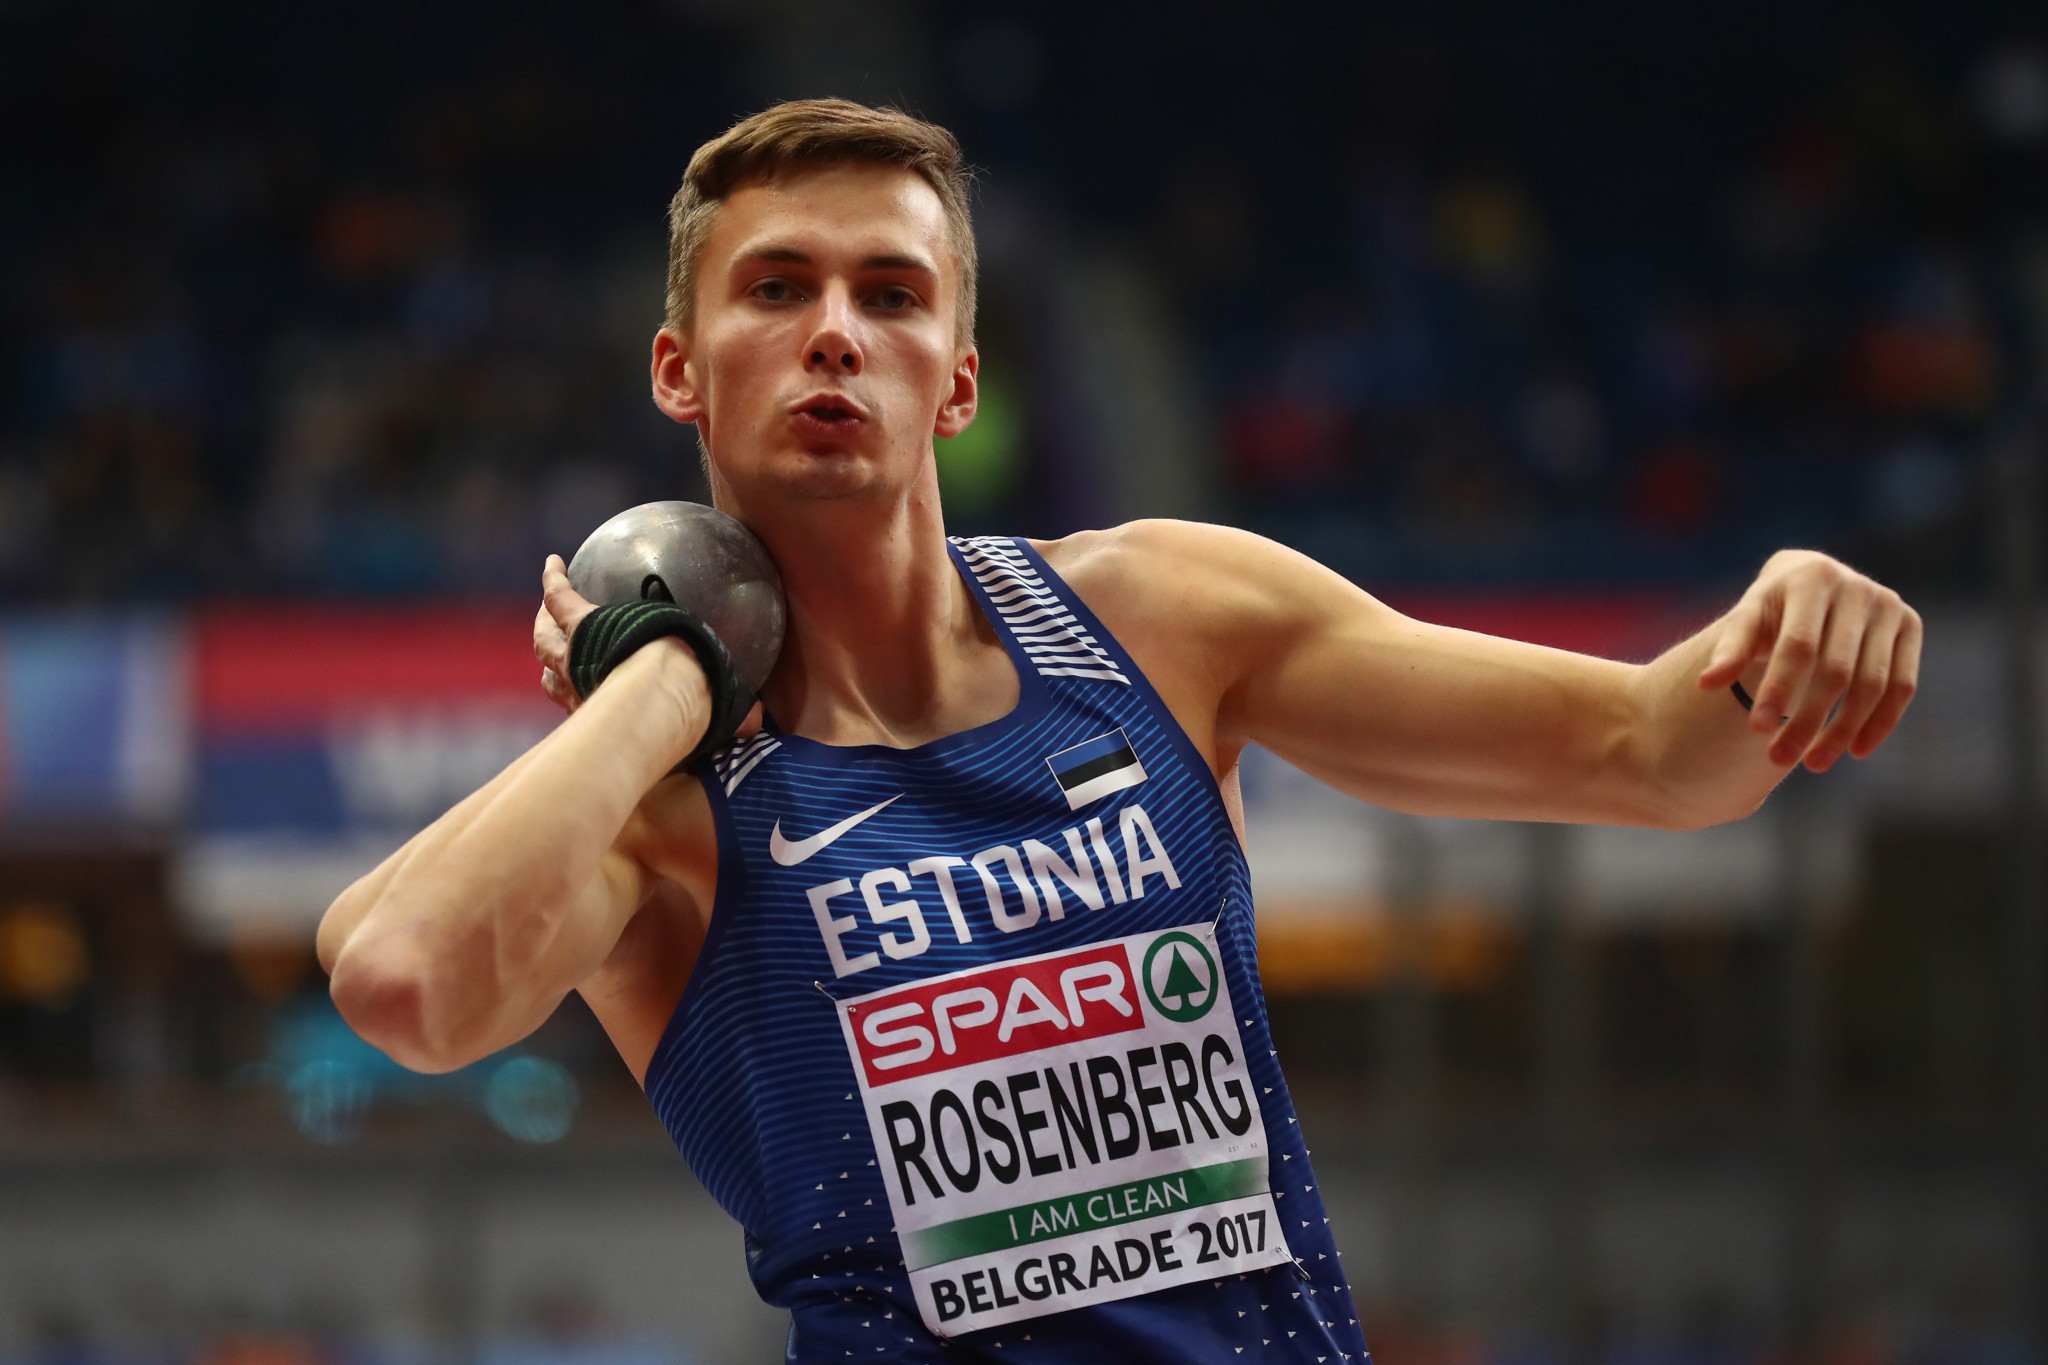 Estonia's Kristjan Rosenberg is the surprise leader after the first day of decathlon action ©Getty Images